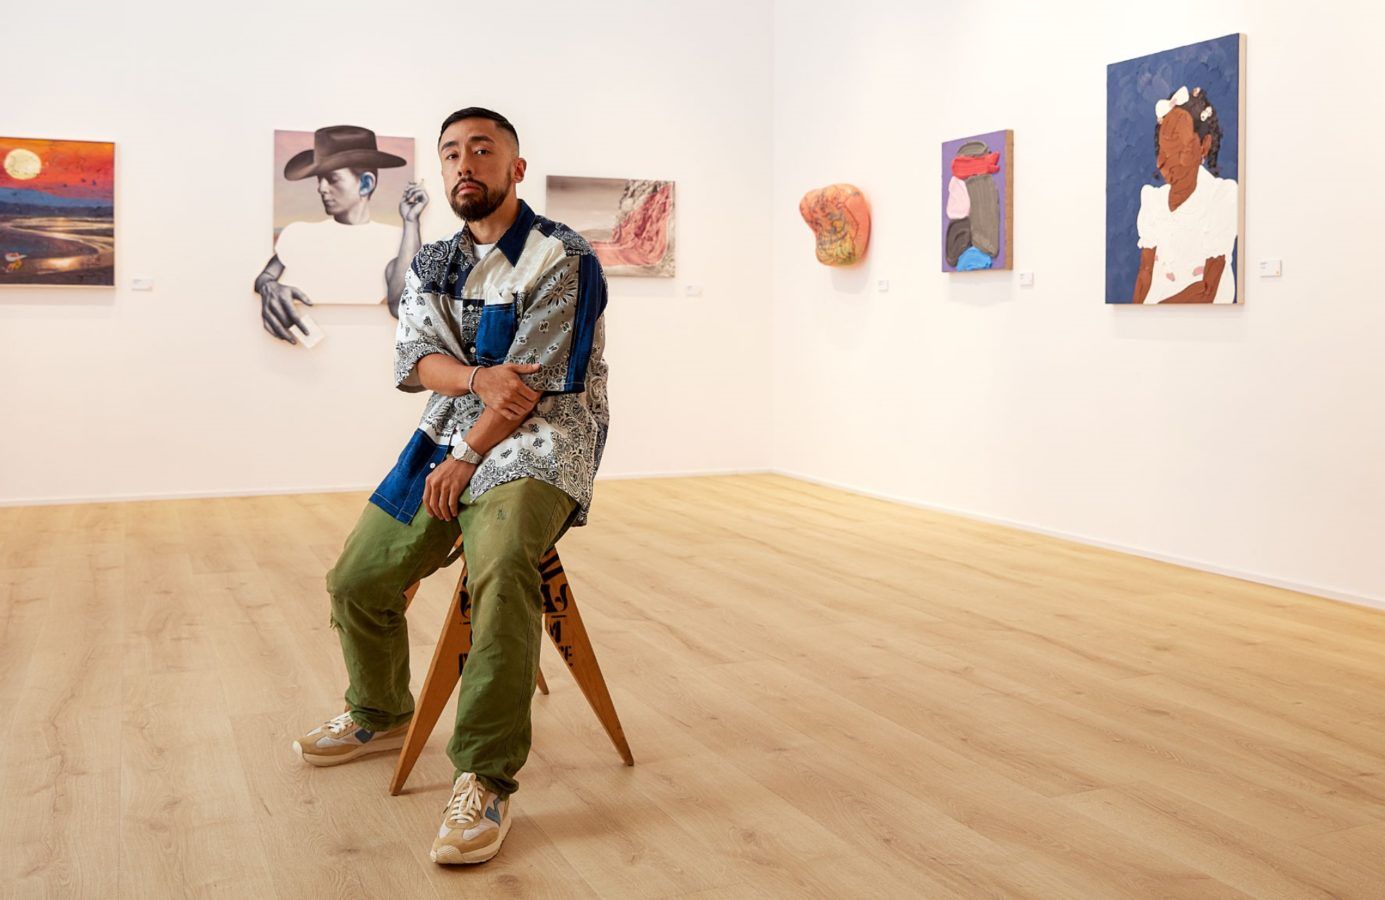 Kevin Poon: Contemporary Art Through the Eyes of an Insider